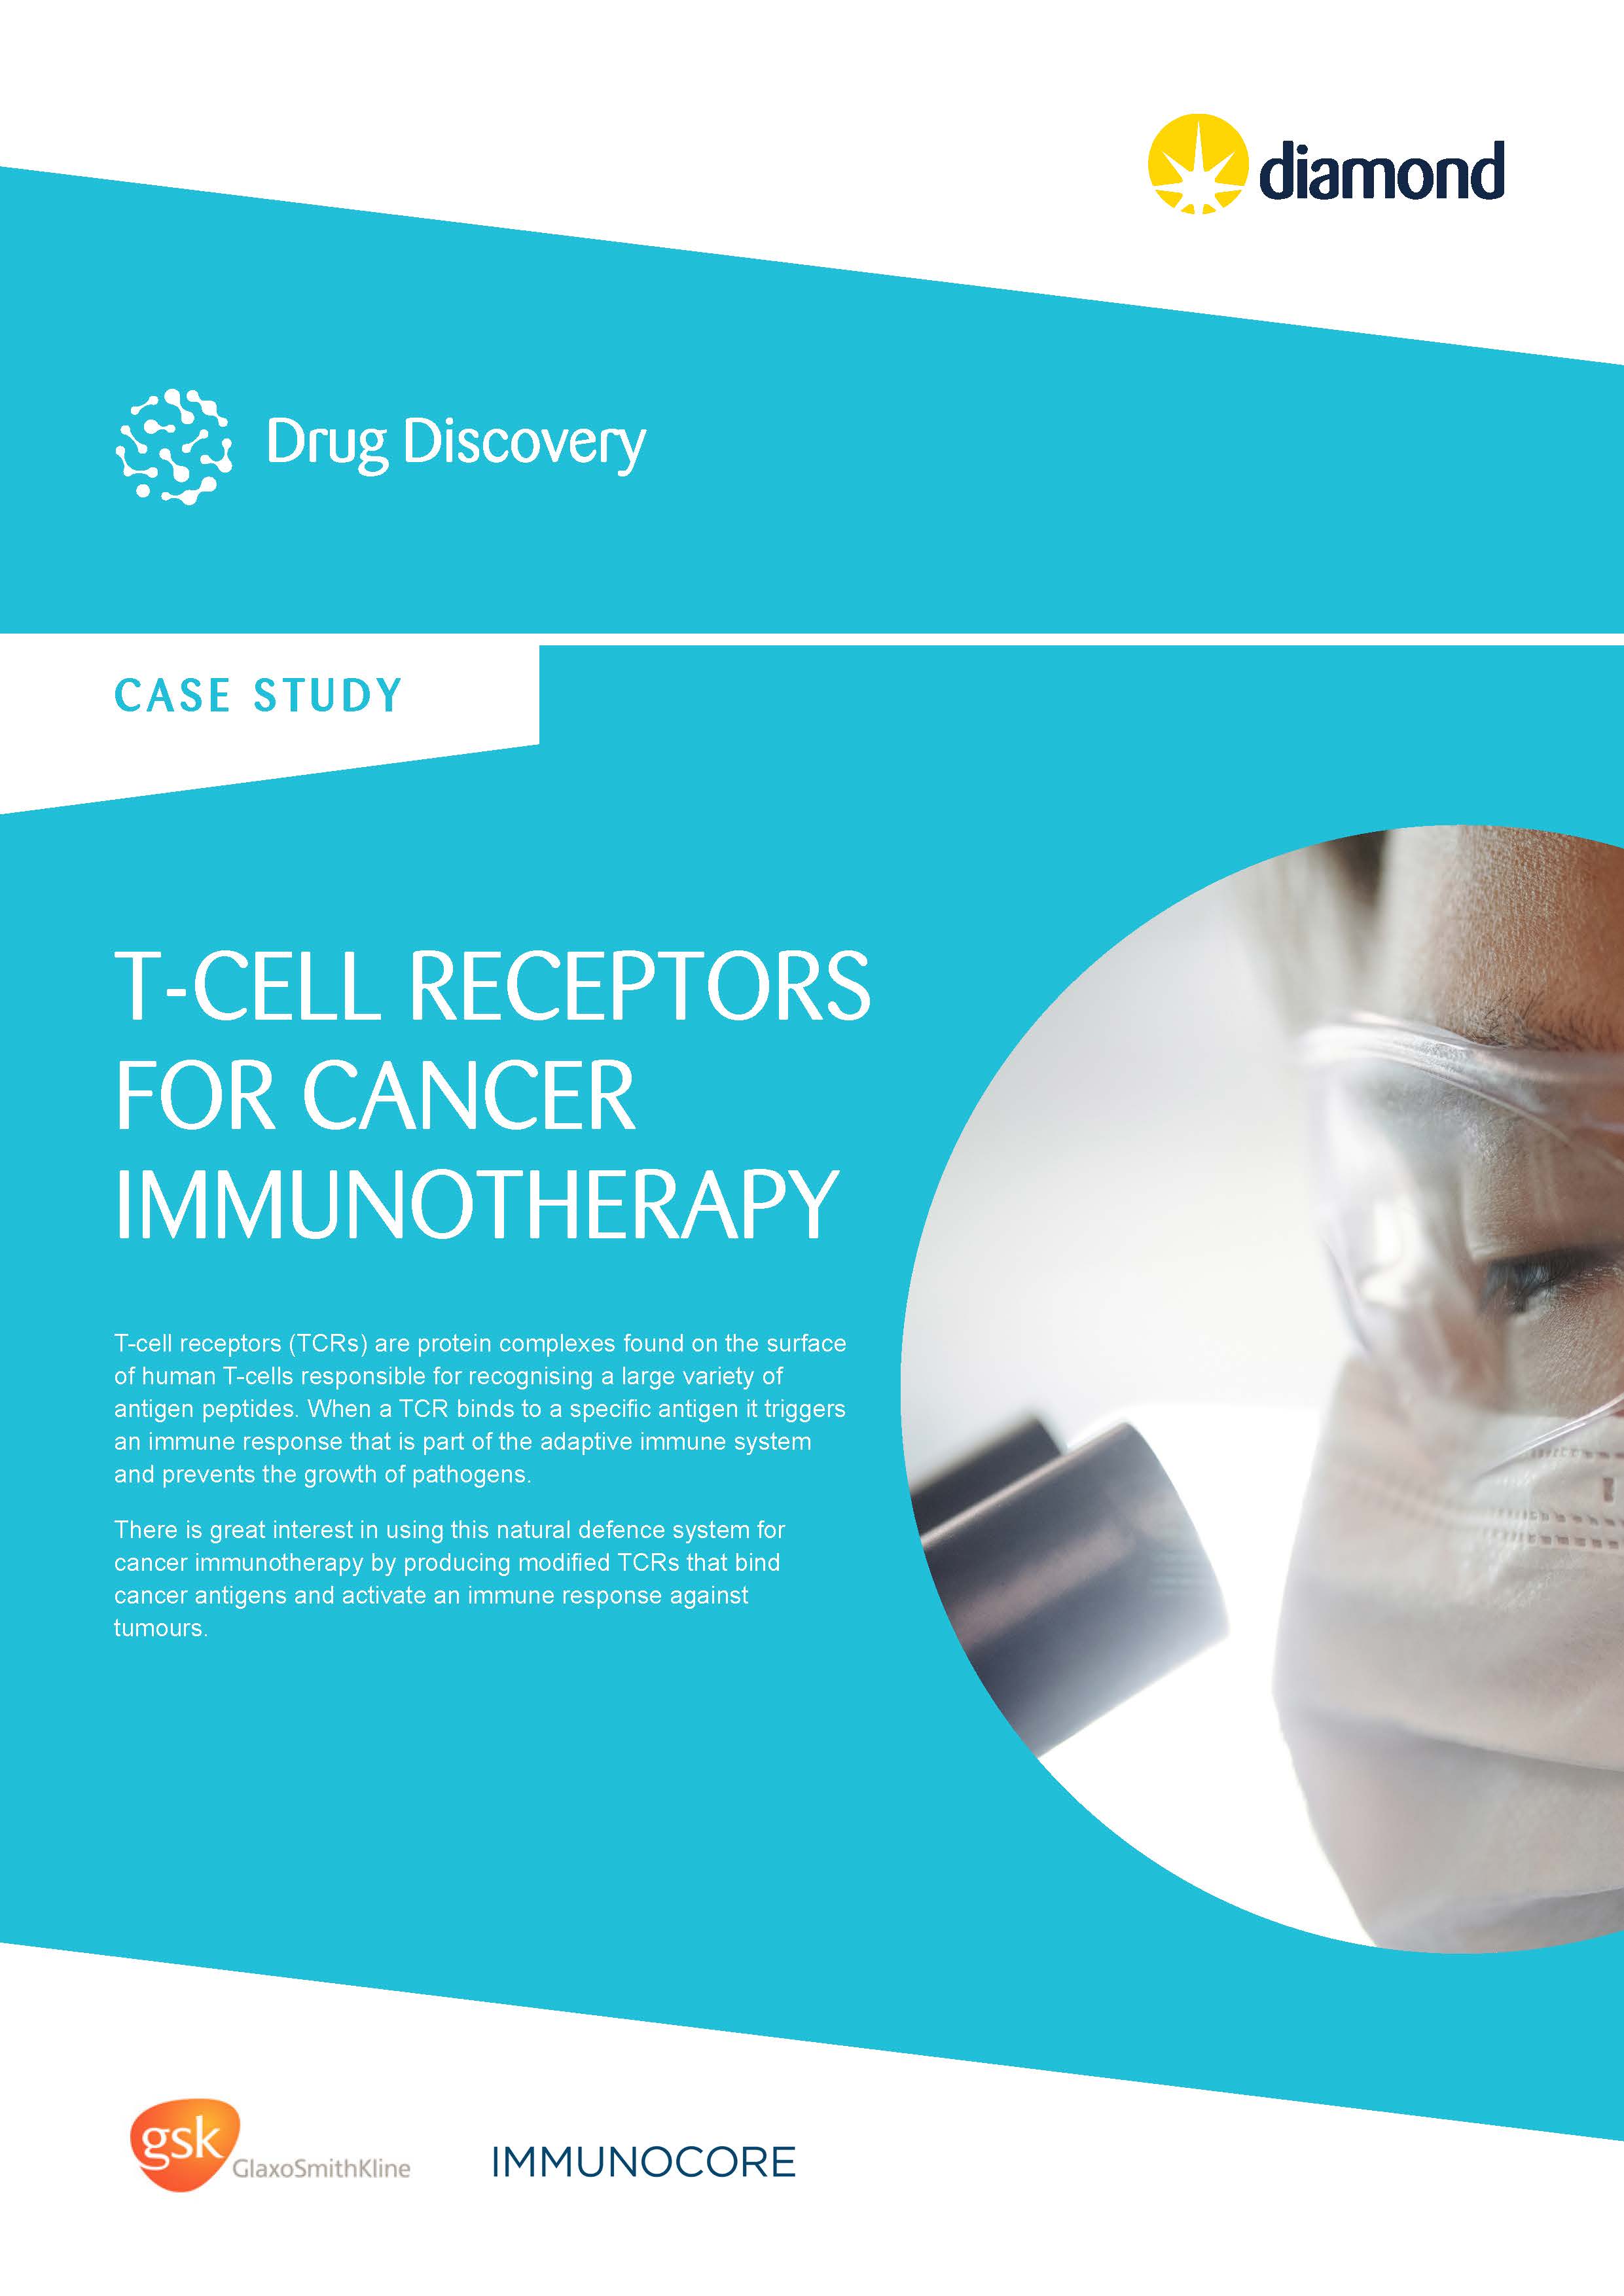 T-Cell Receptors for Cancer Immunotherapy